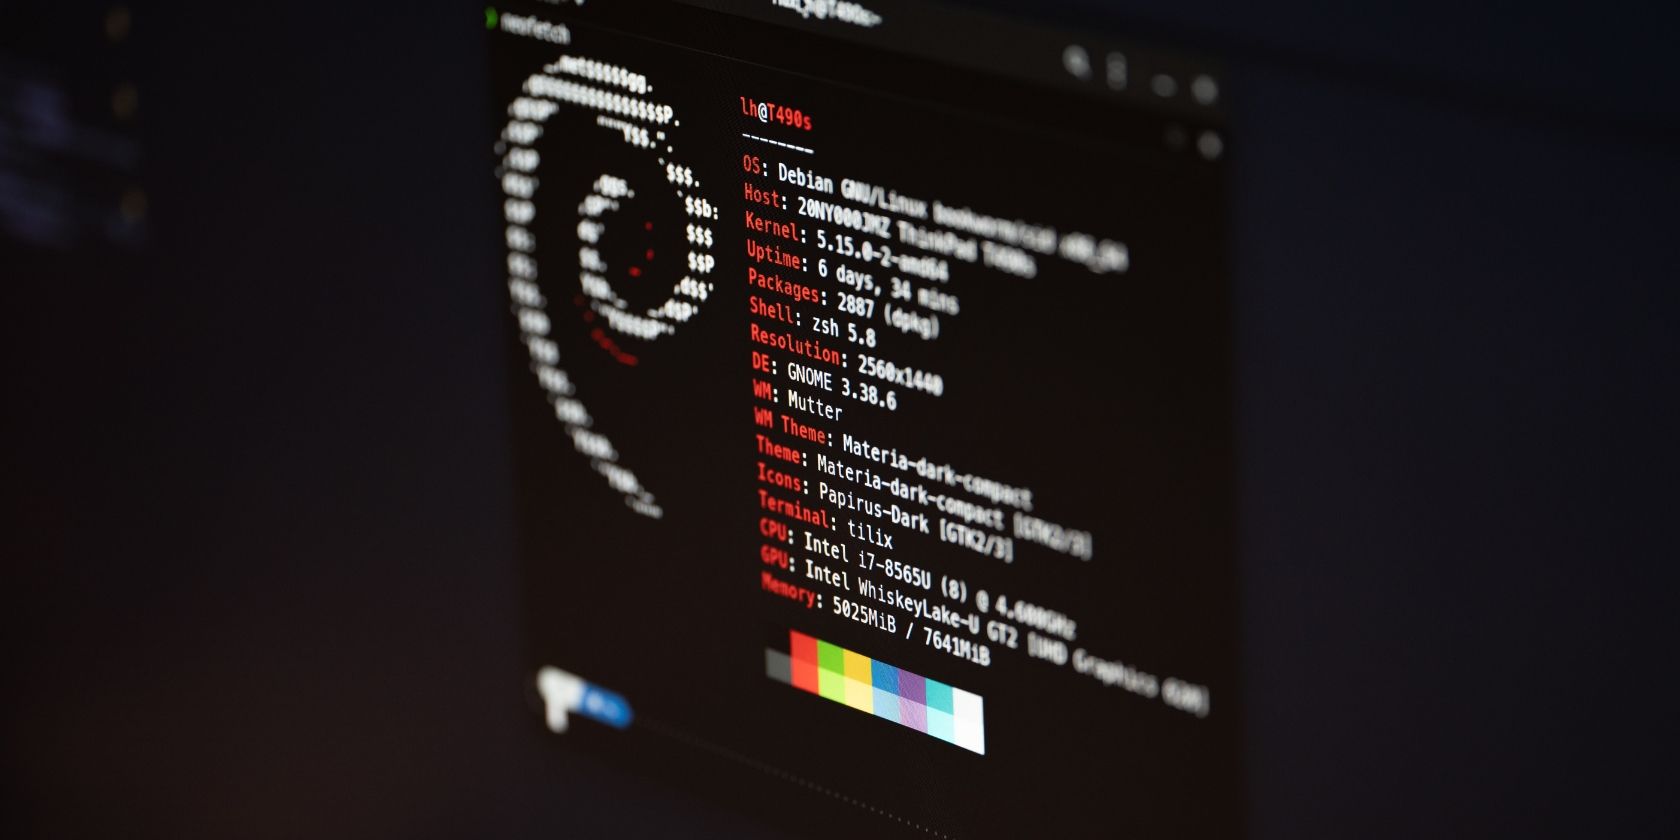 Image of neofetch running on a terminal